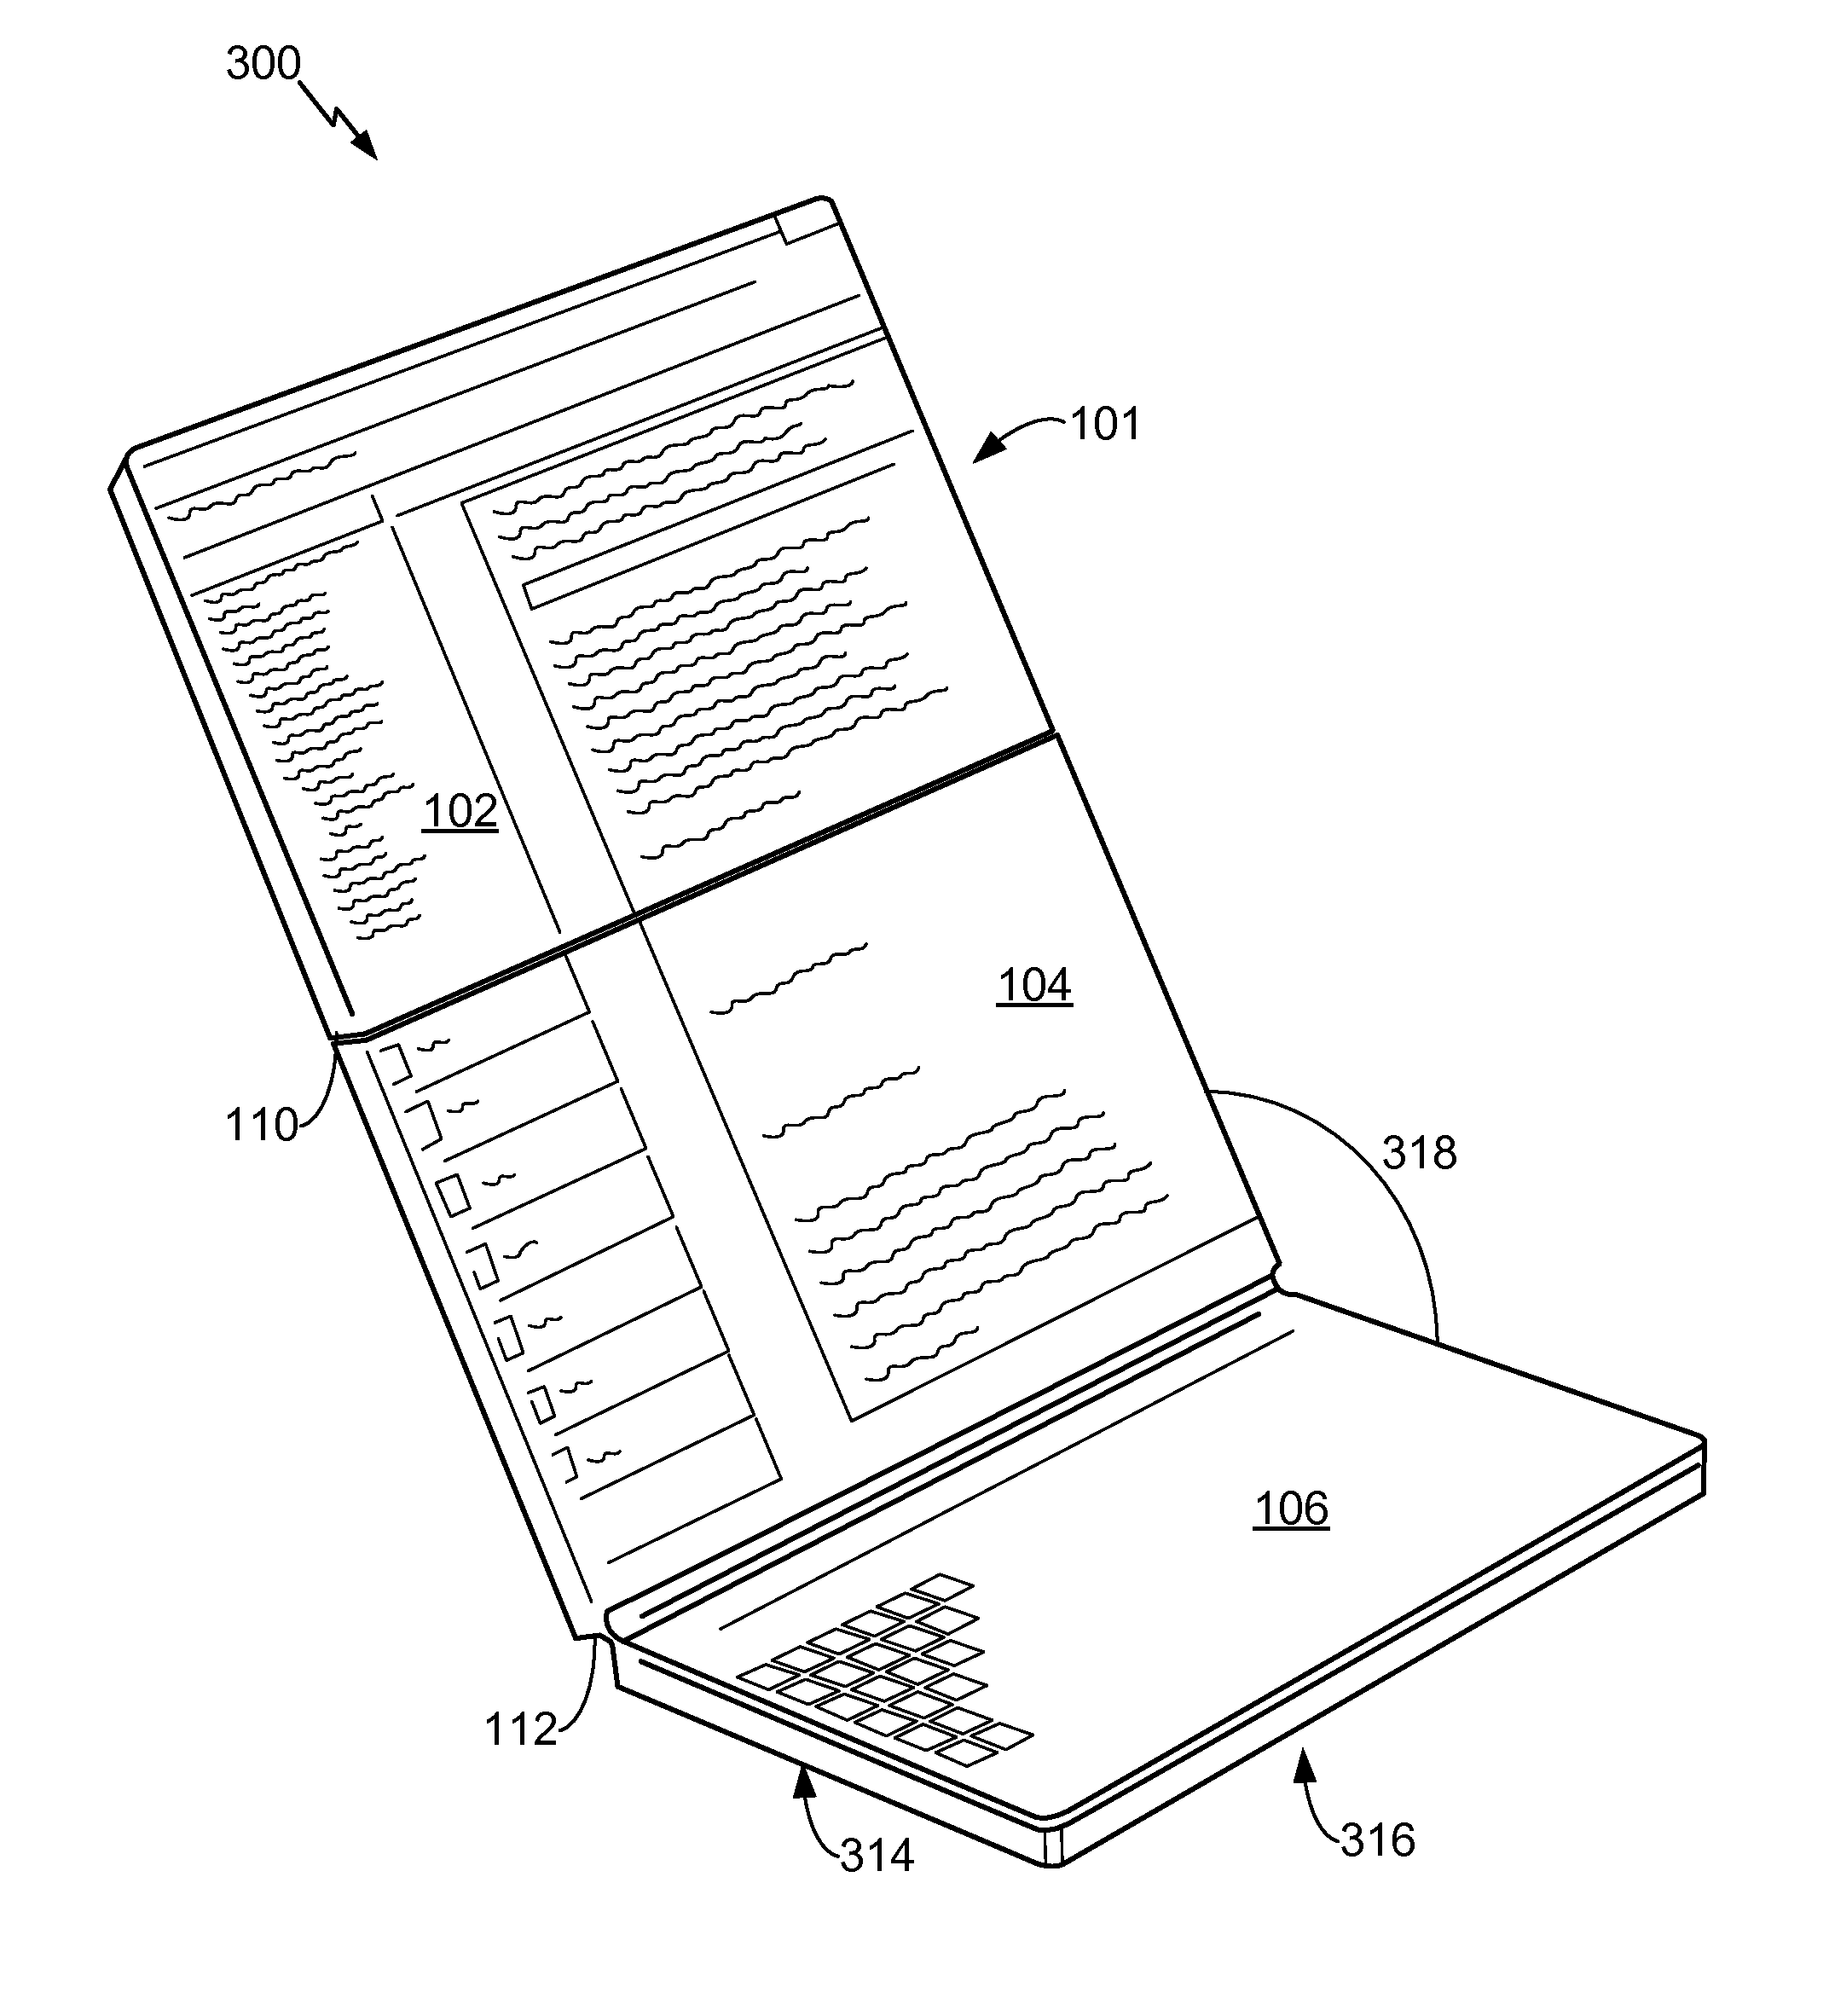 Sending a parameter based on screen size or screen resolution of a multi-panel electronic device to a server